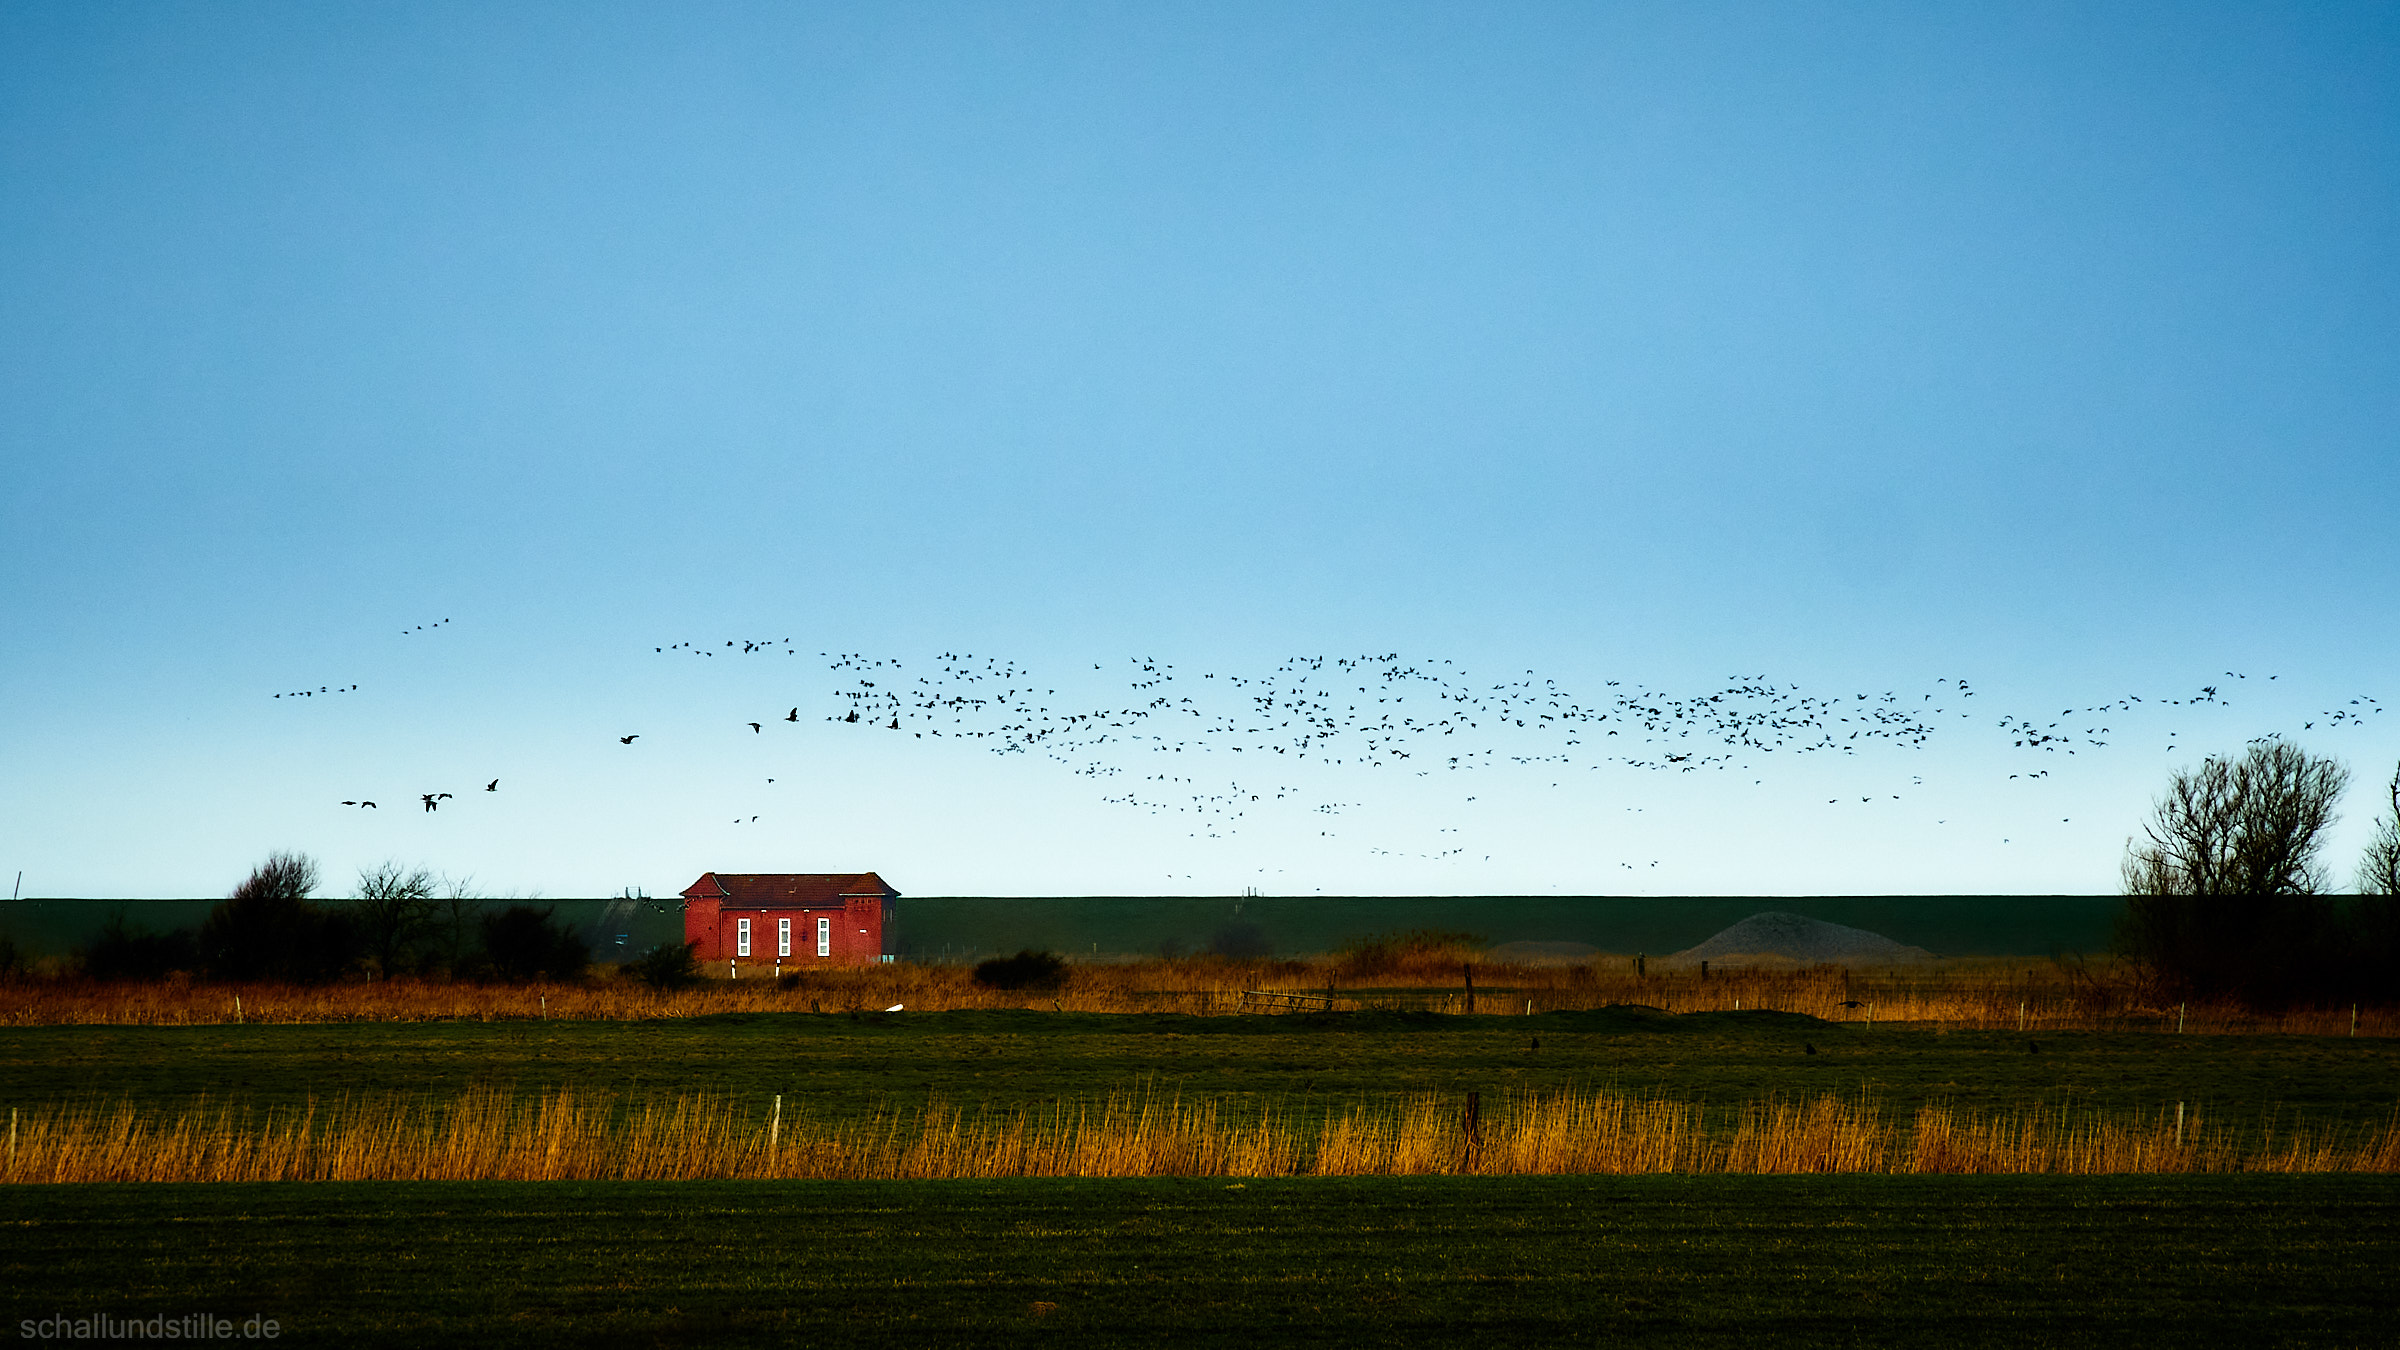 the föhr north pumping station seen from the distance across some fields, with a flock of seabirds circling before it